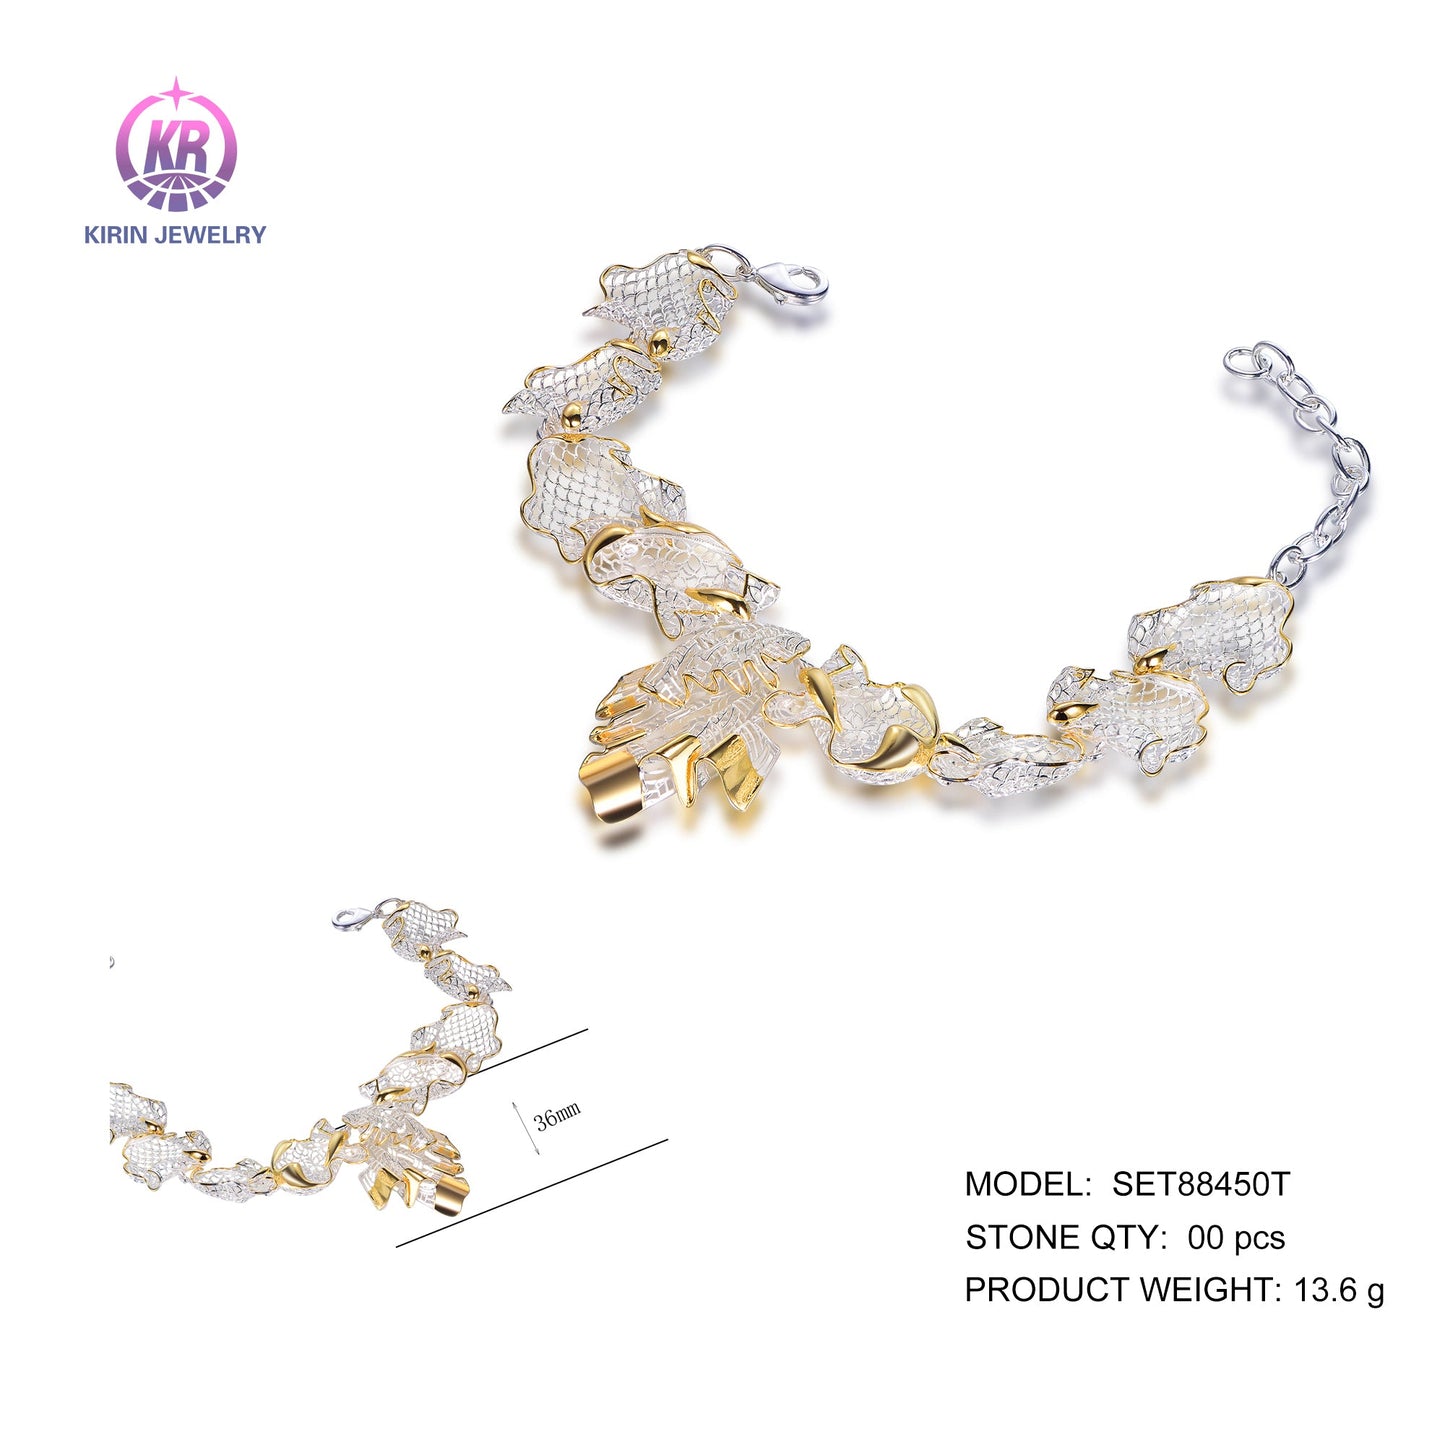 925 silver bracelet with 2-tone plating rhodium and 14K gold SET88450T Kirin Jewelry